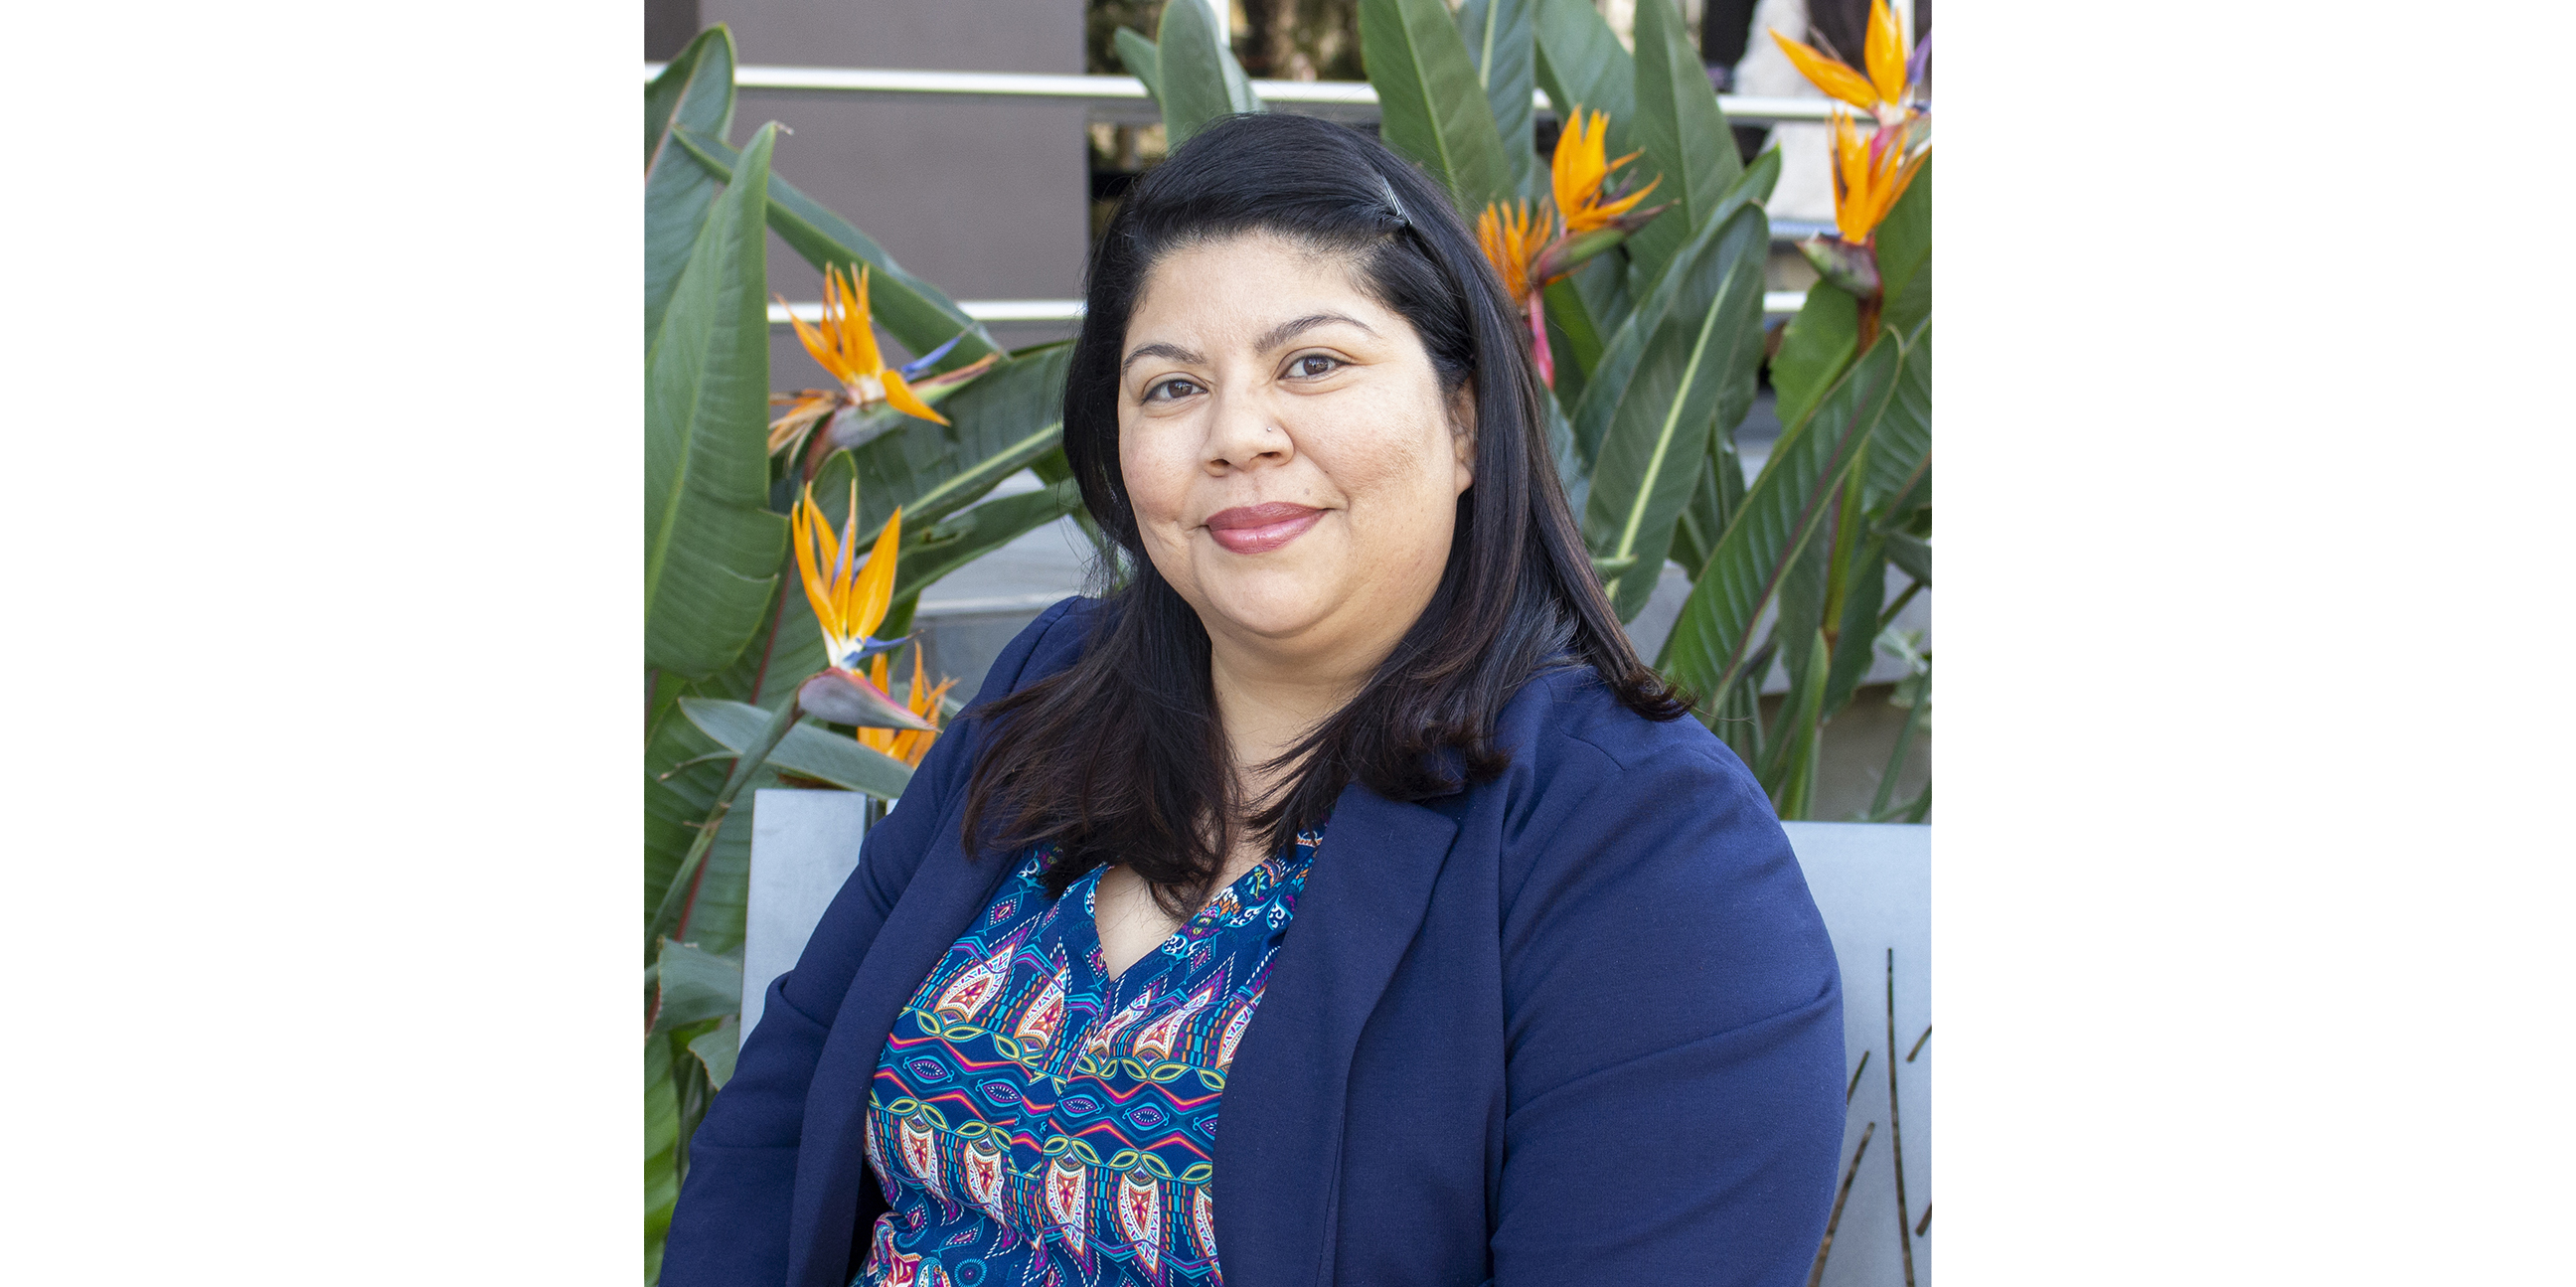 Connie Morales Gutierrez: Director, Disabled Students Programs & Services (Community College Administrator), B.A/M.A. Anthropology / Ed.D (In-Progress)